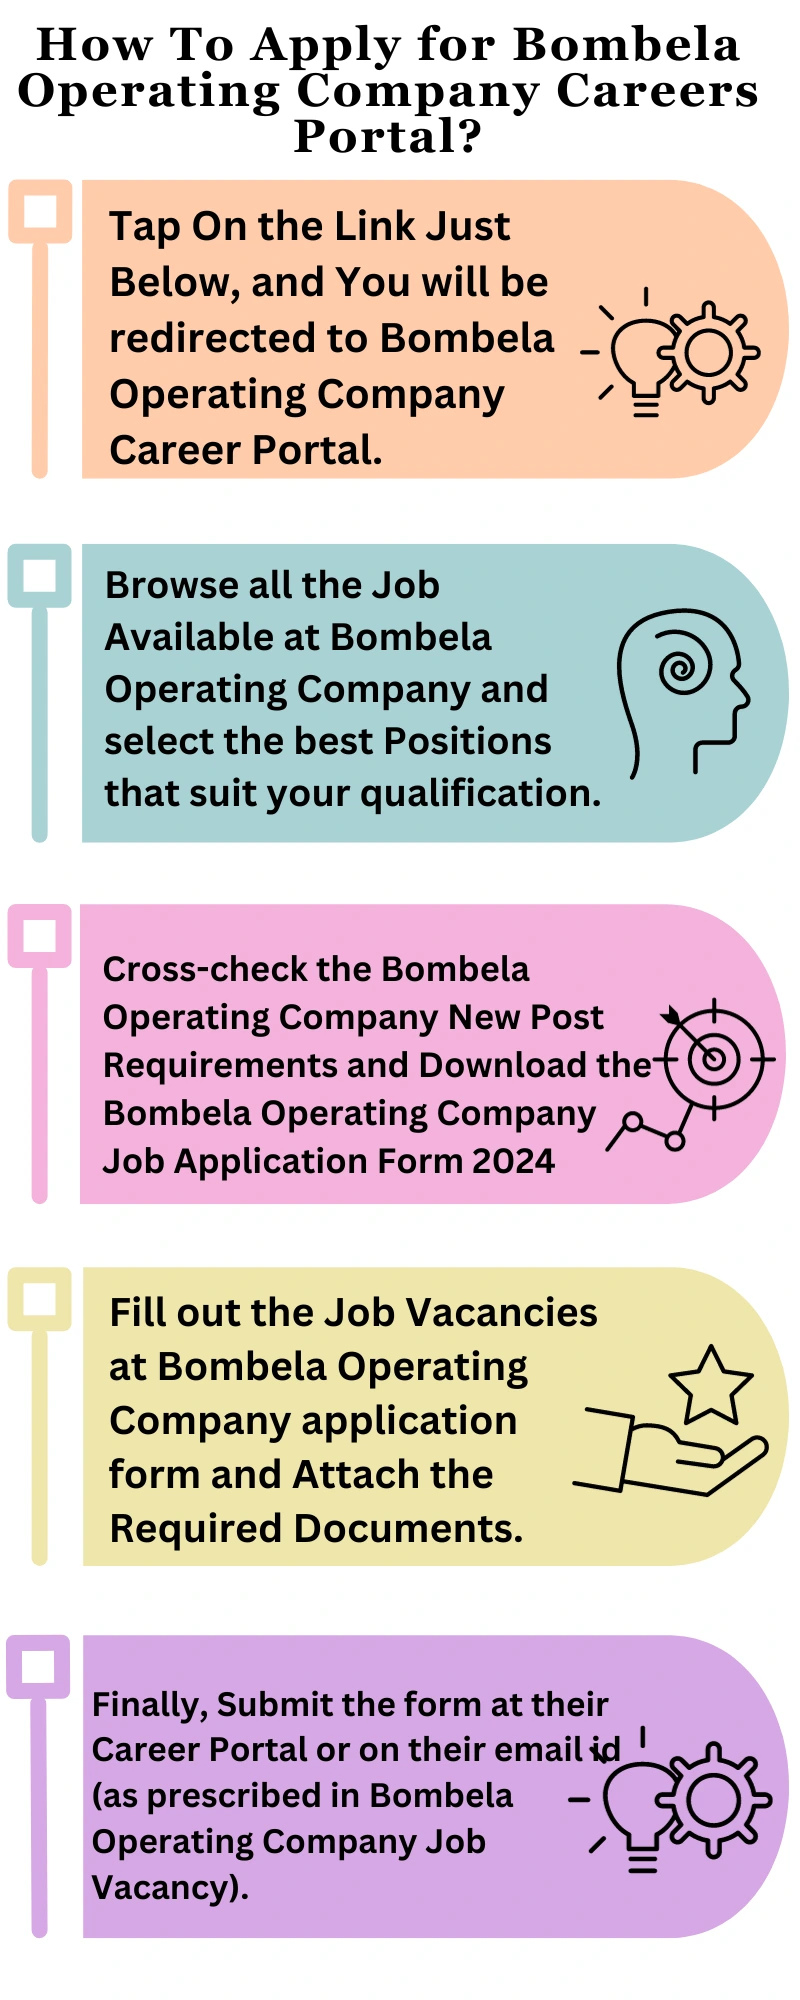 How To Apply for Bombela Operating Company Careers Portal?